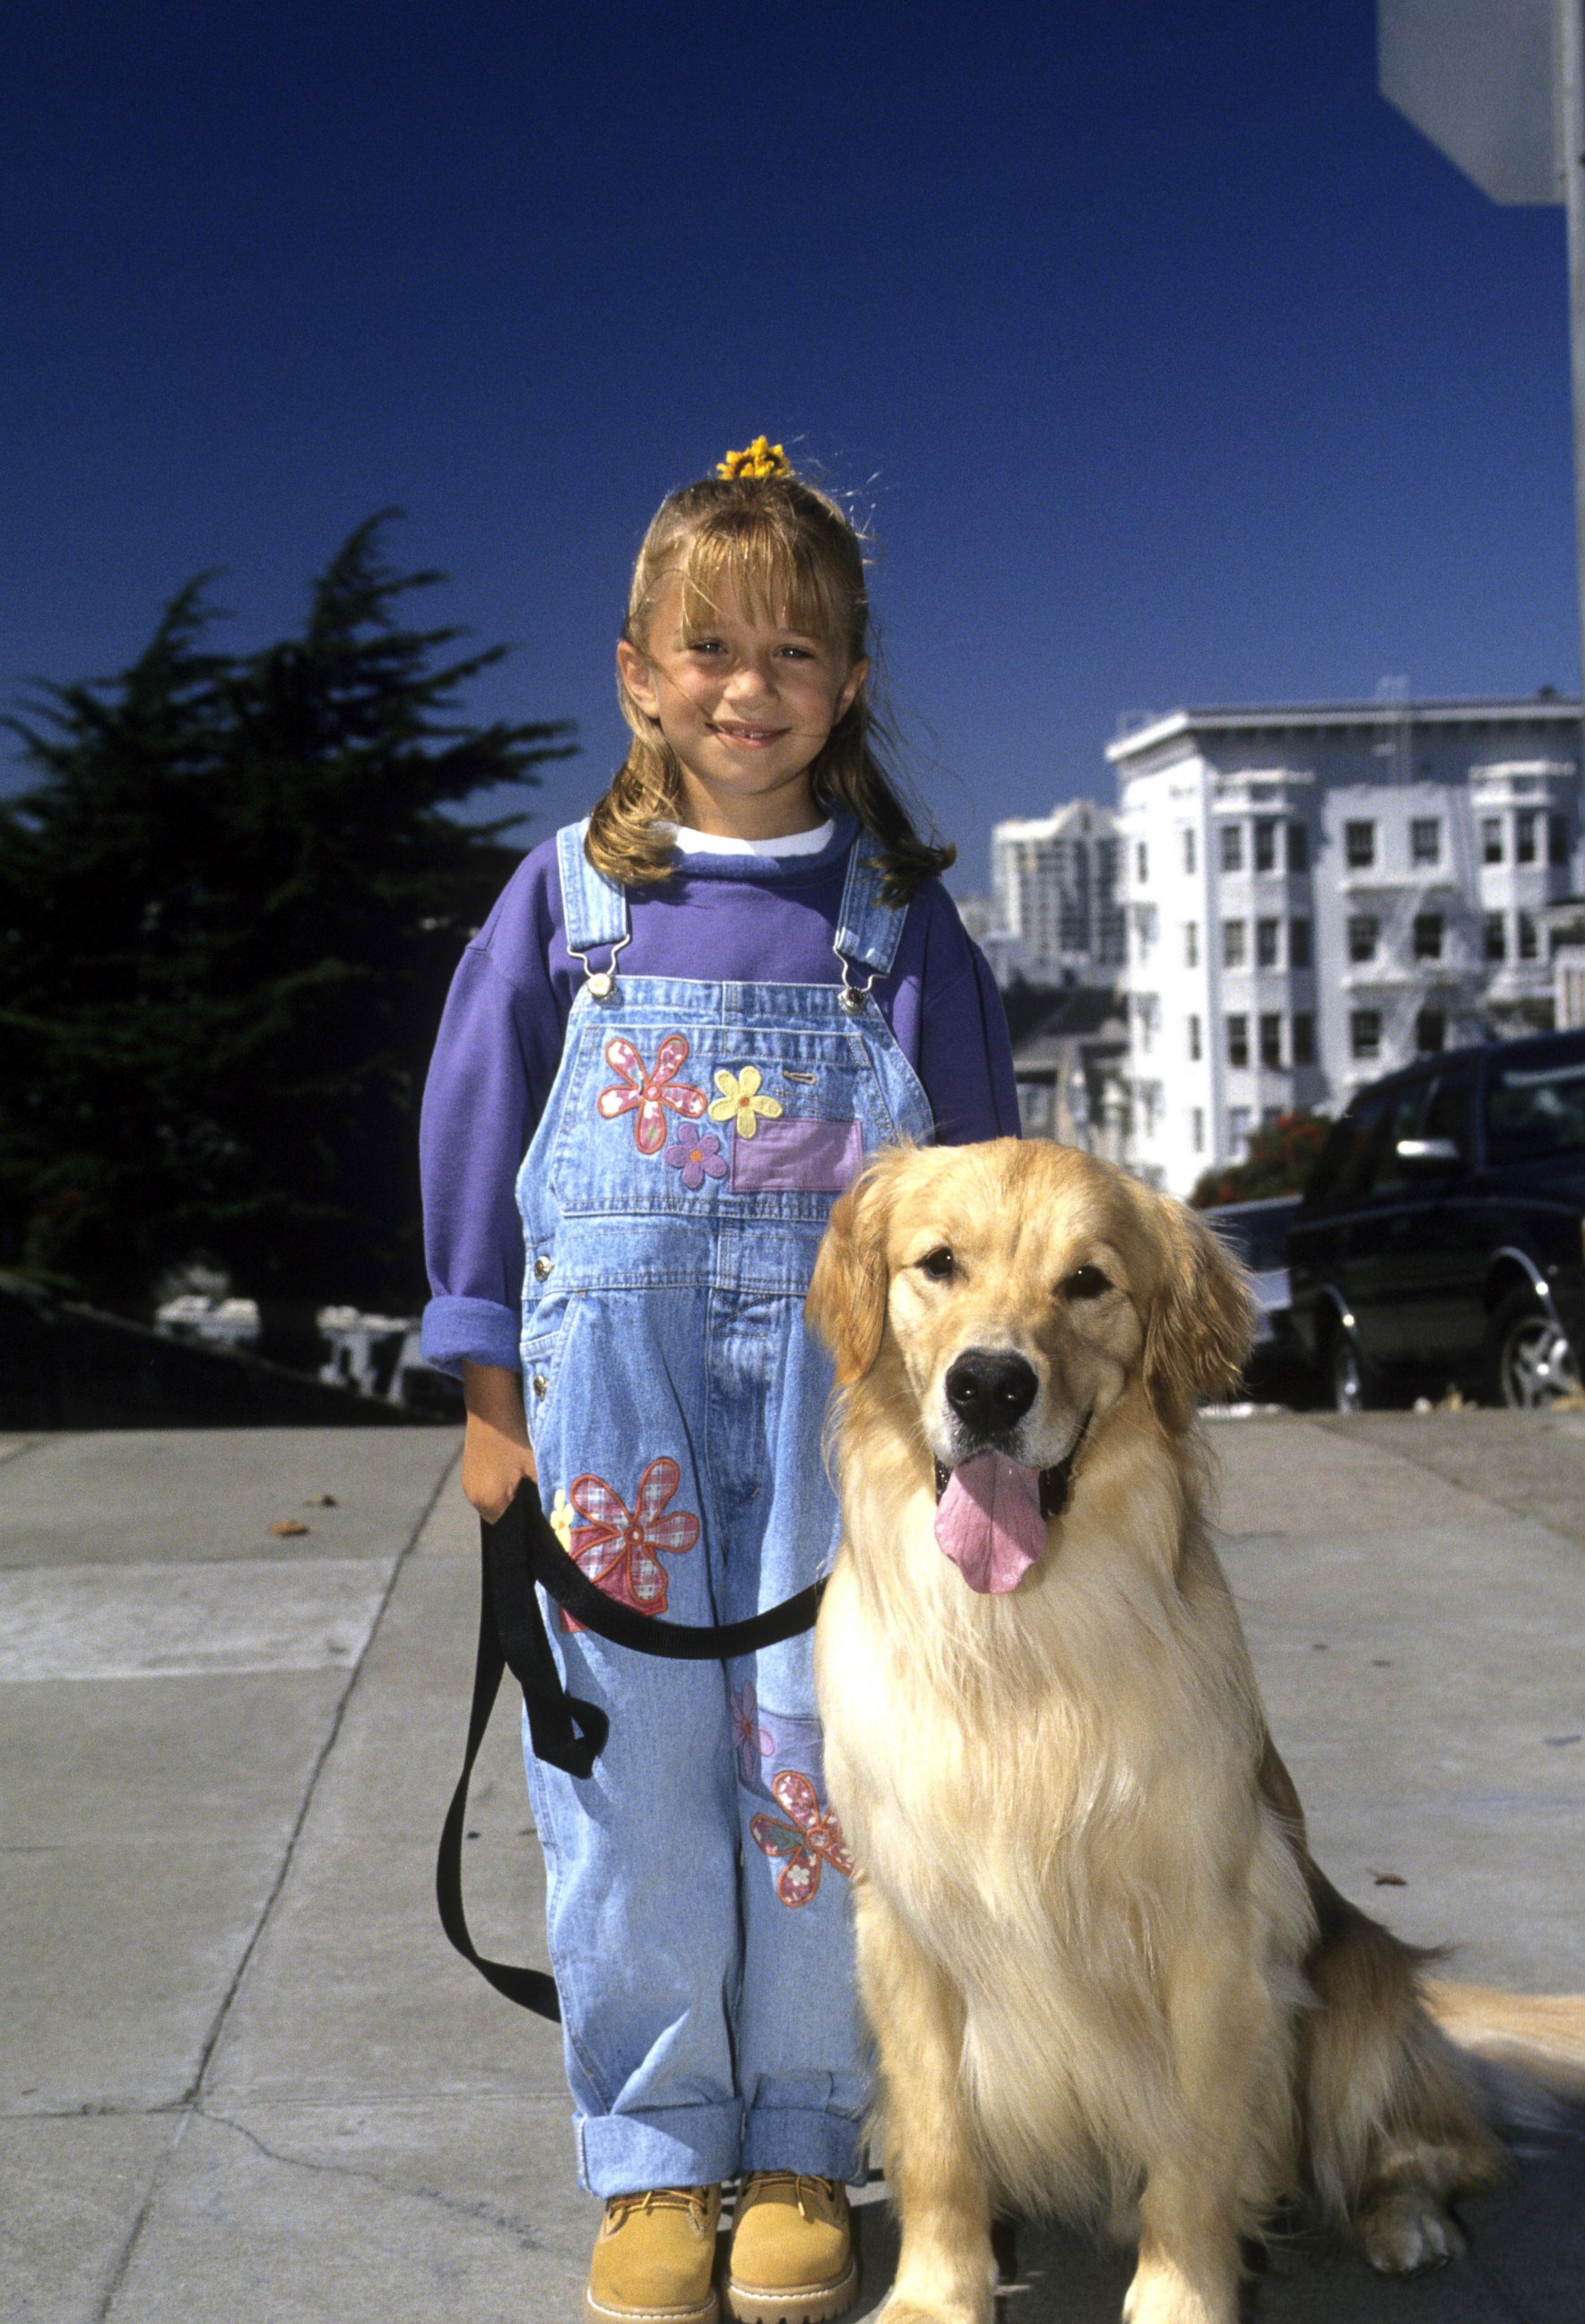 PHOTO: Comet appears here on location with Ashley Olsen in San Francisco on Aug. 17, 1994.